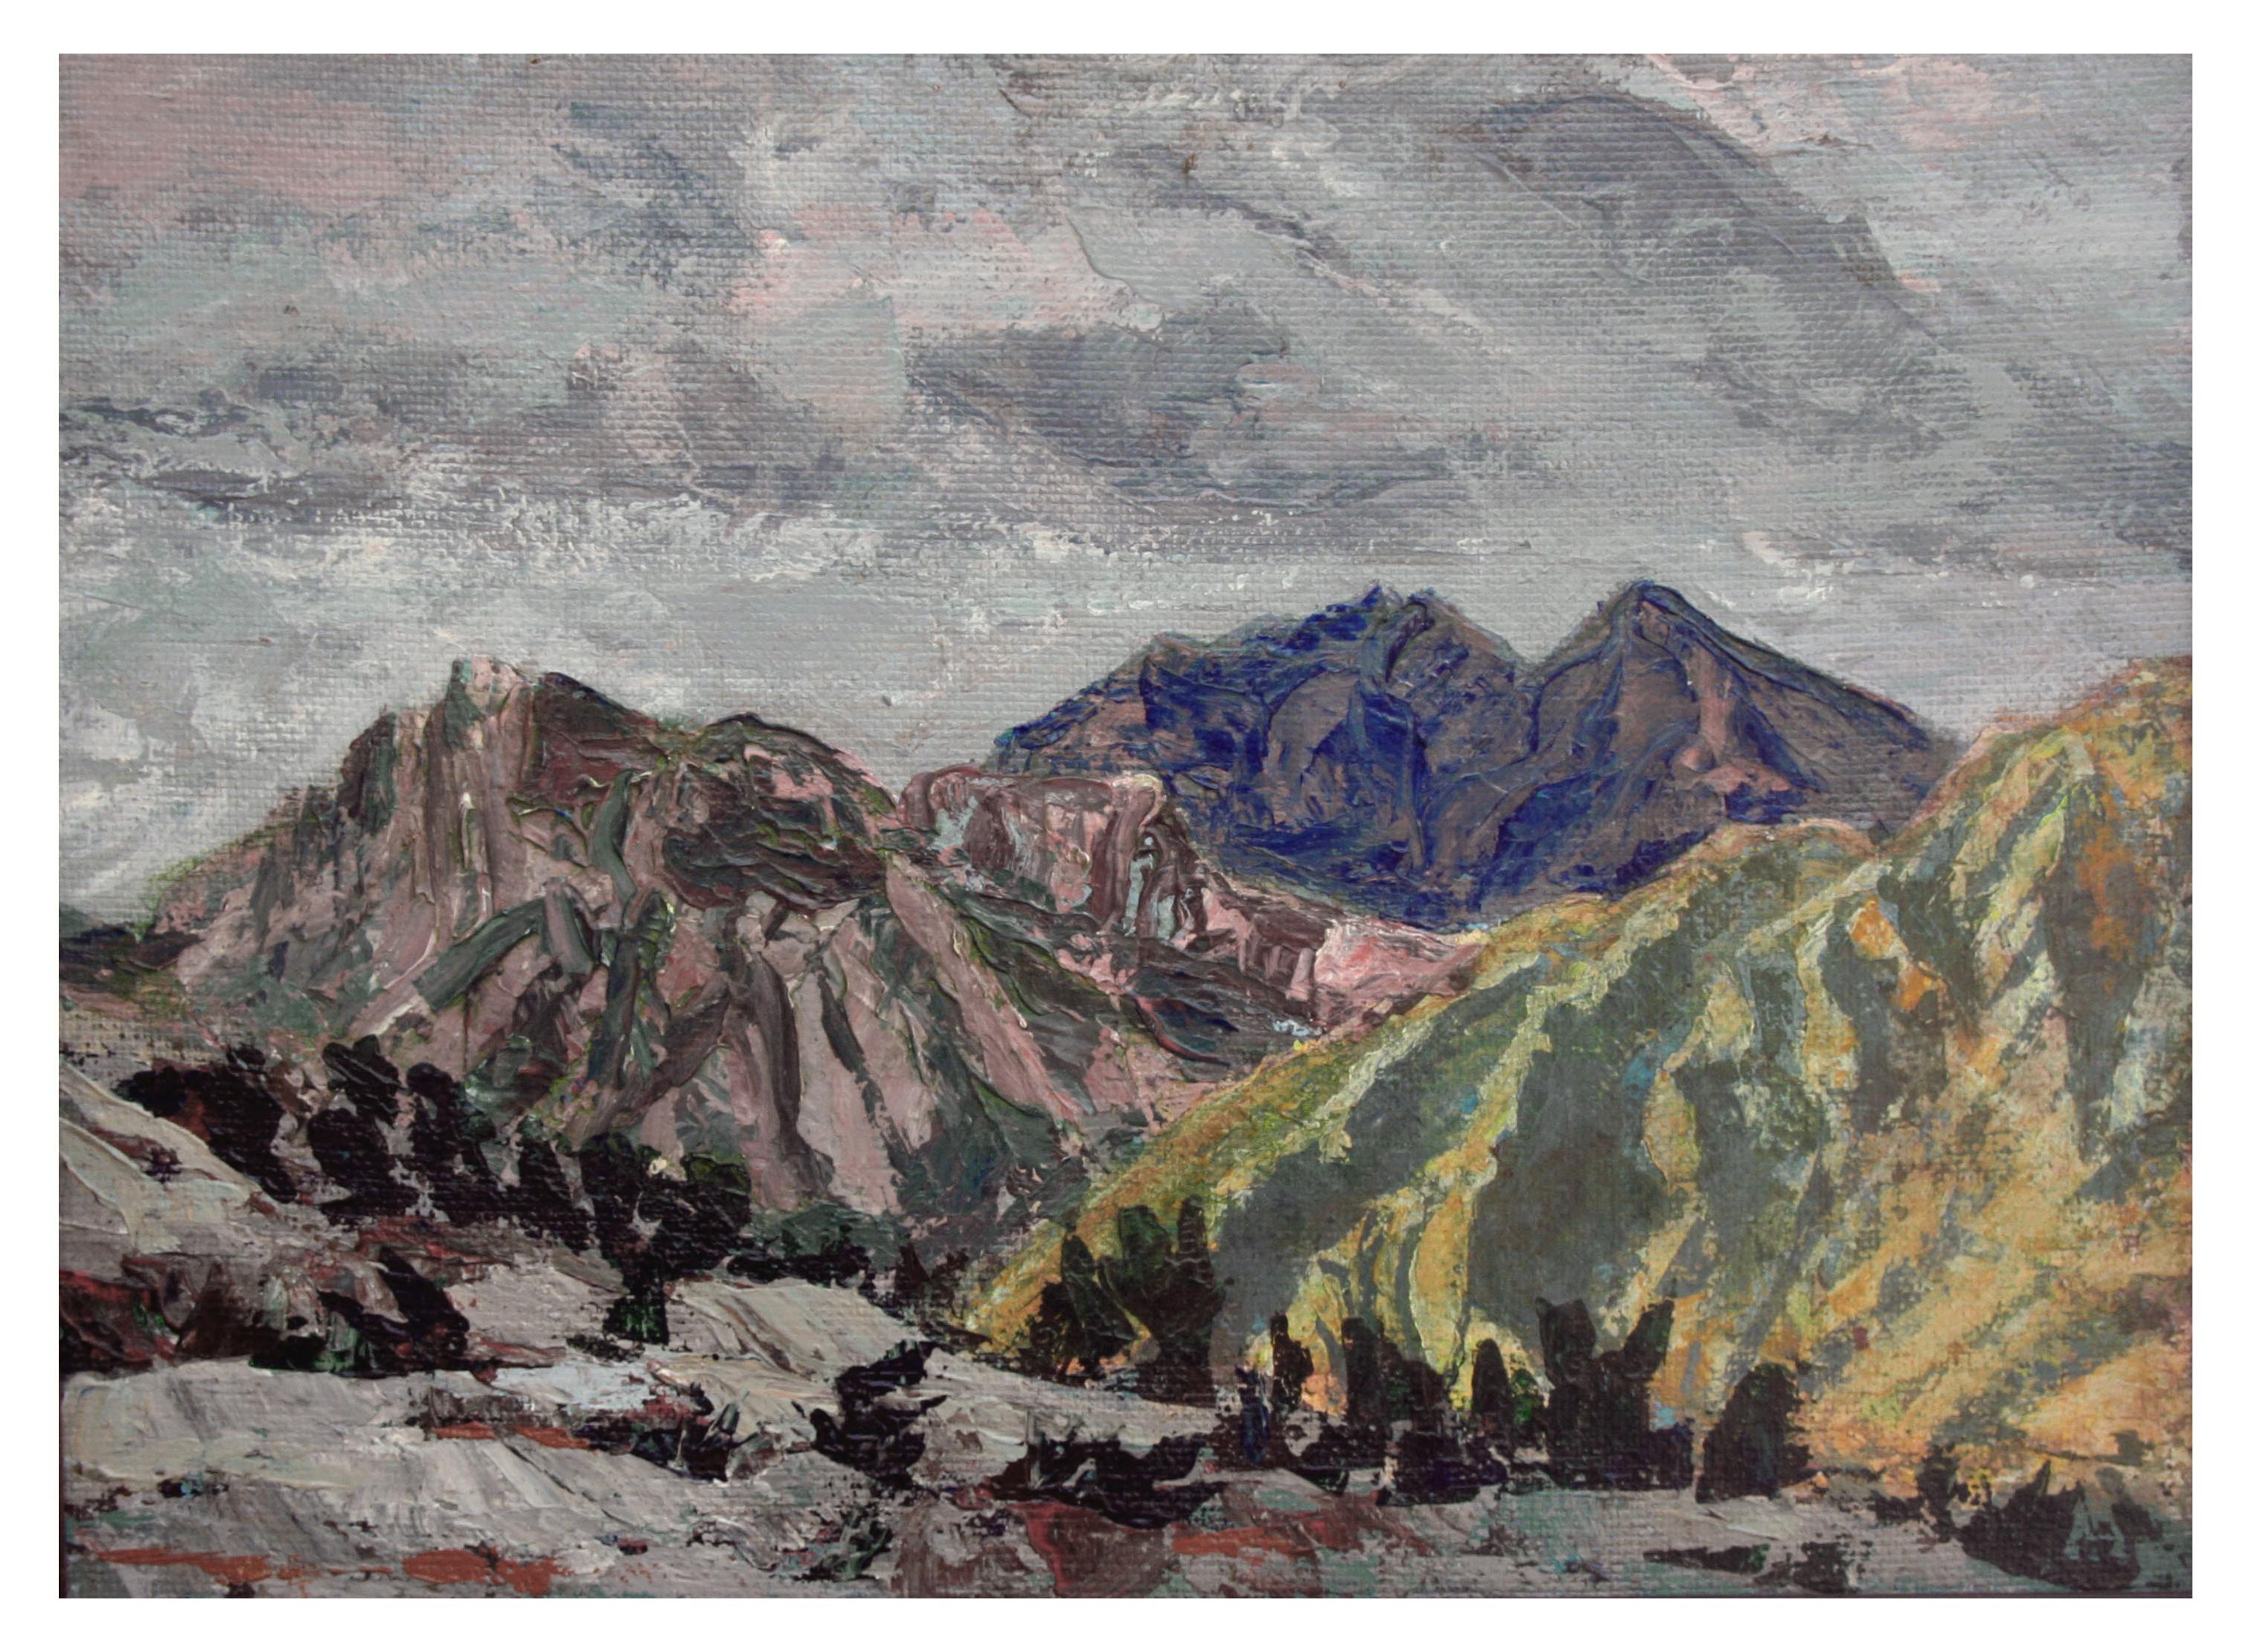 Stormy Skies Over Yosemite, Mid Century Mountain Landscape - Painting by Unknown